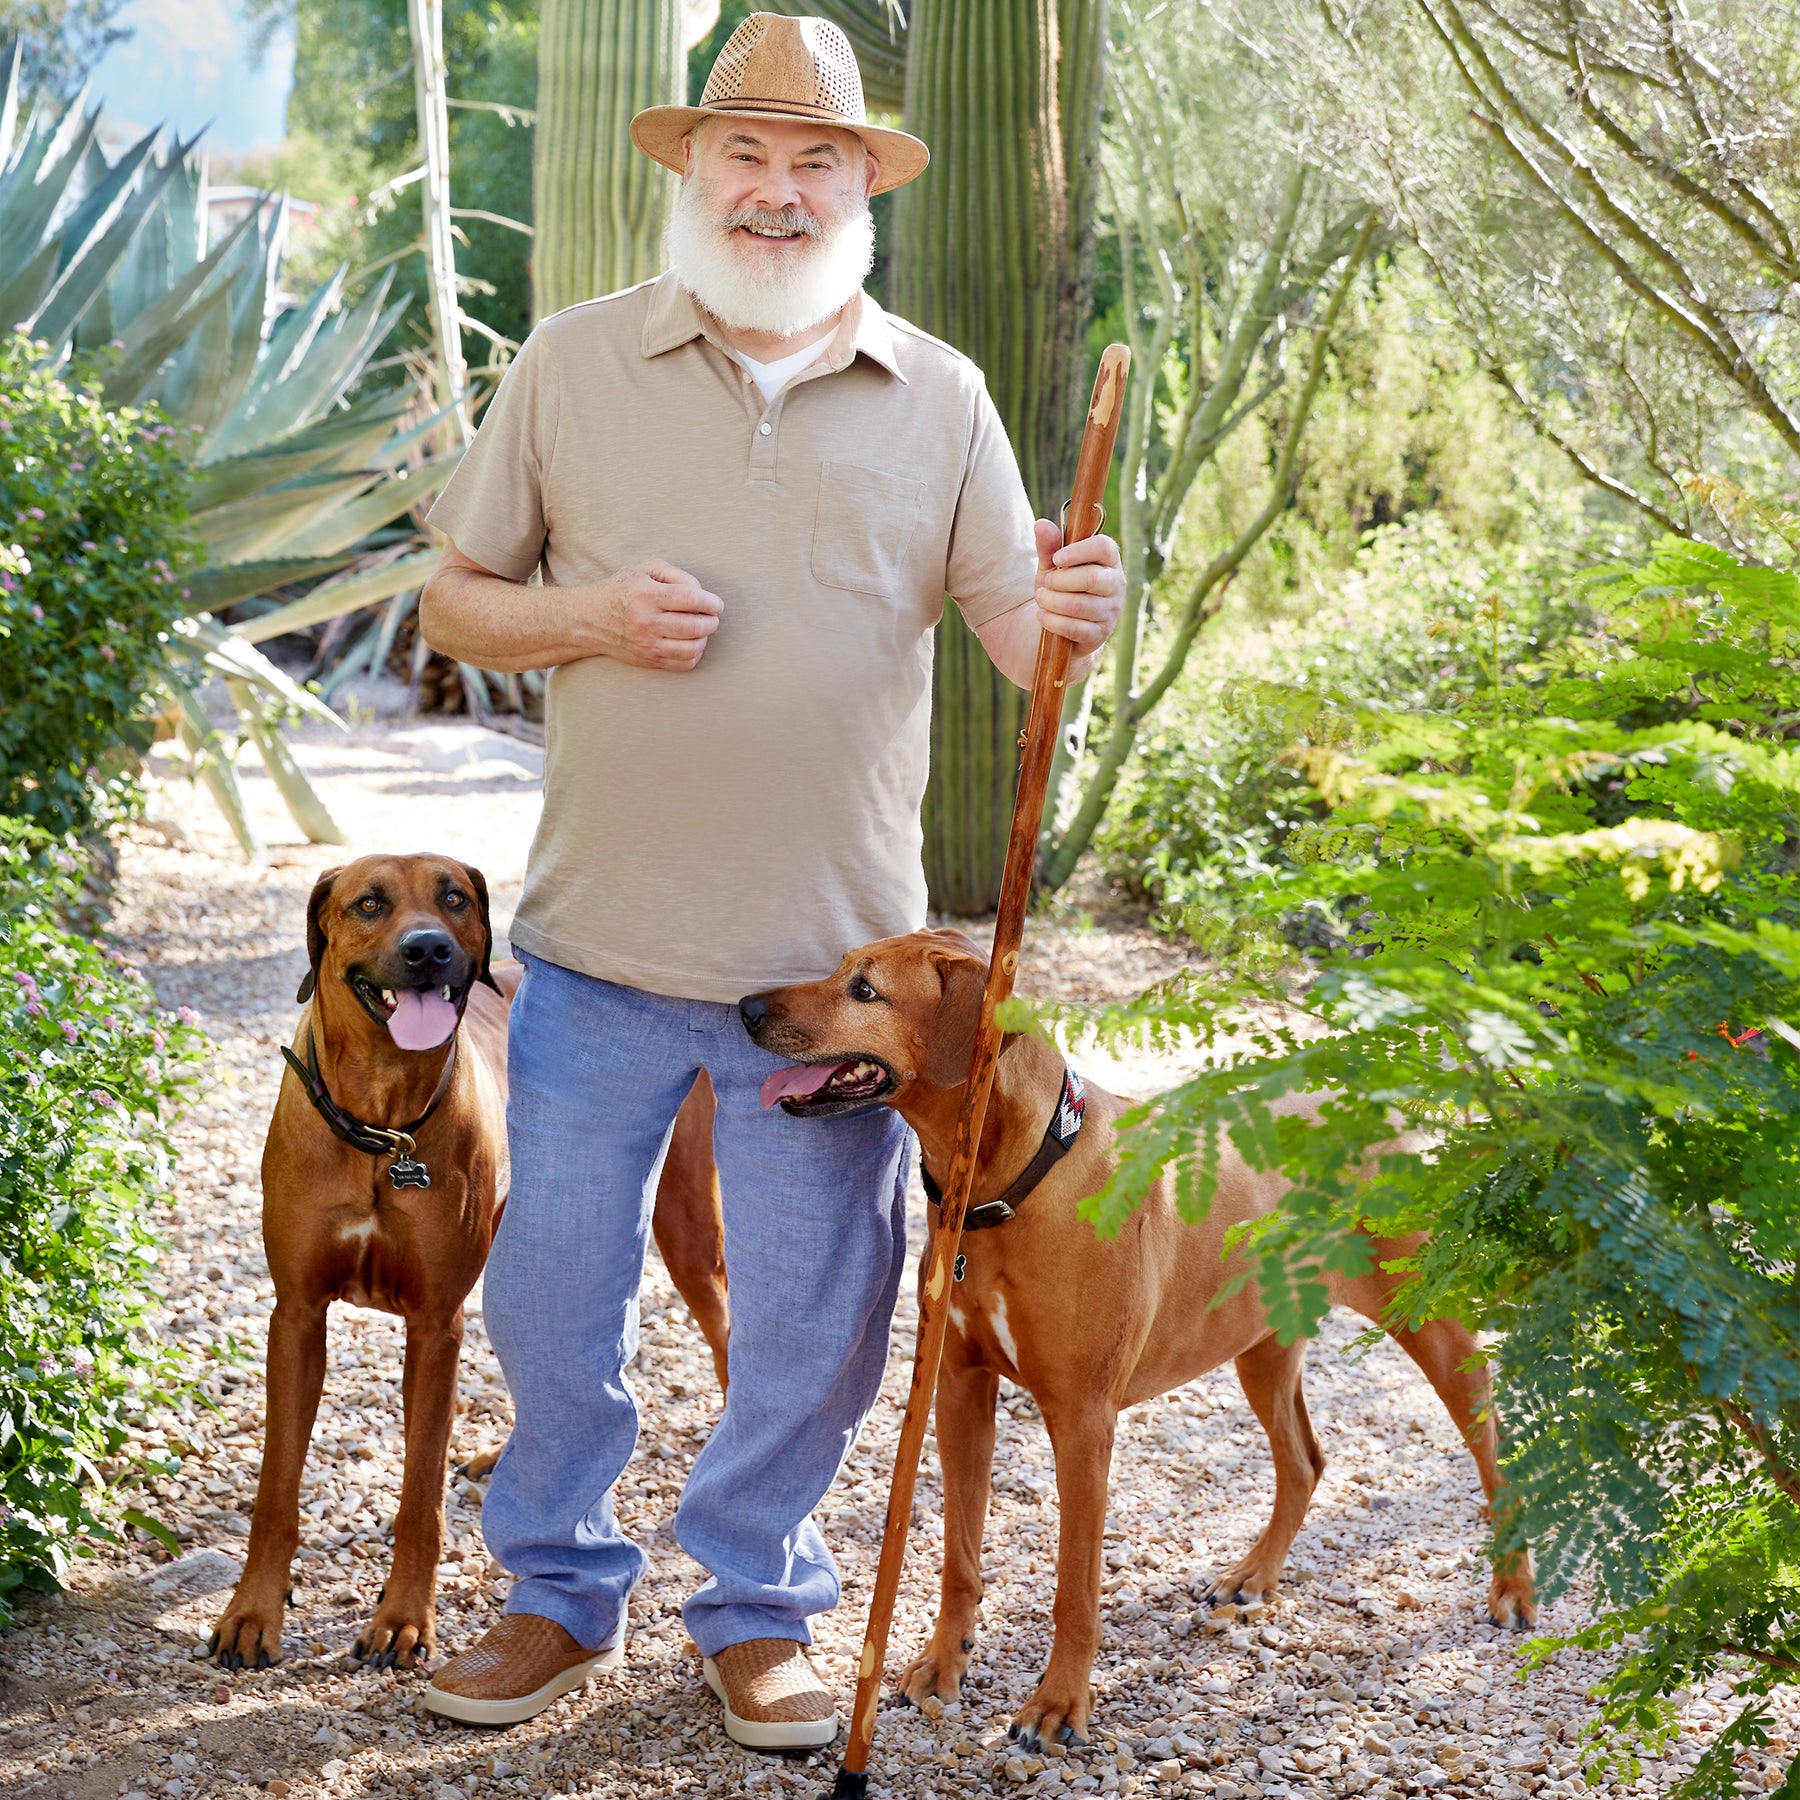 Image of Dr. Andrew Weil standing outside on a gravel path between various plants. There are two Rhodesian Ridgeback dogs standing on either side of him.